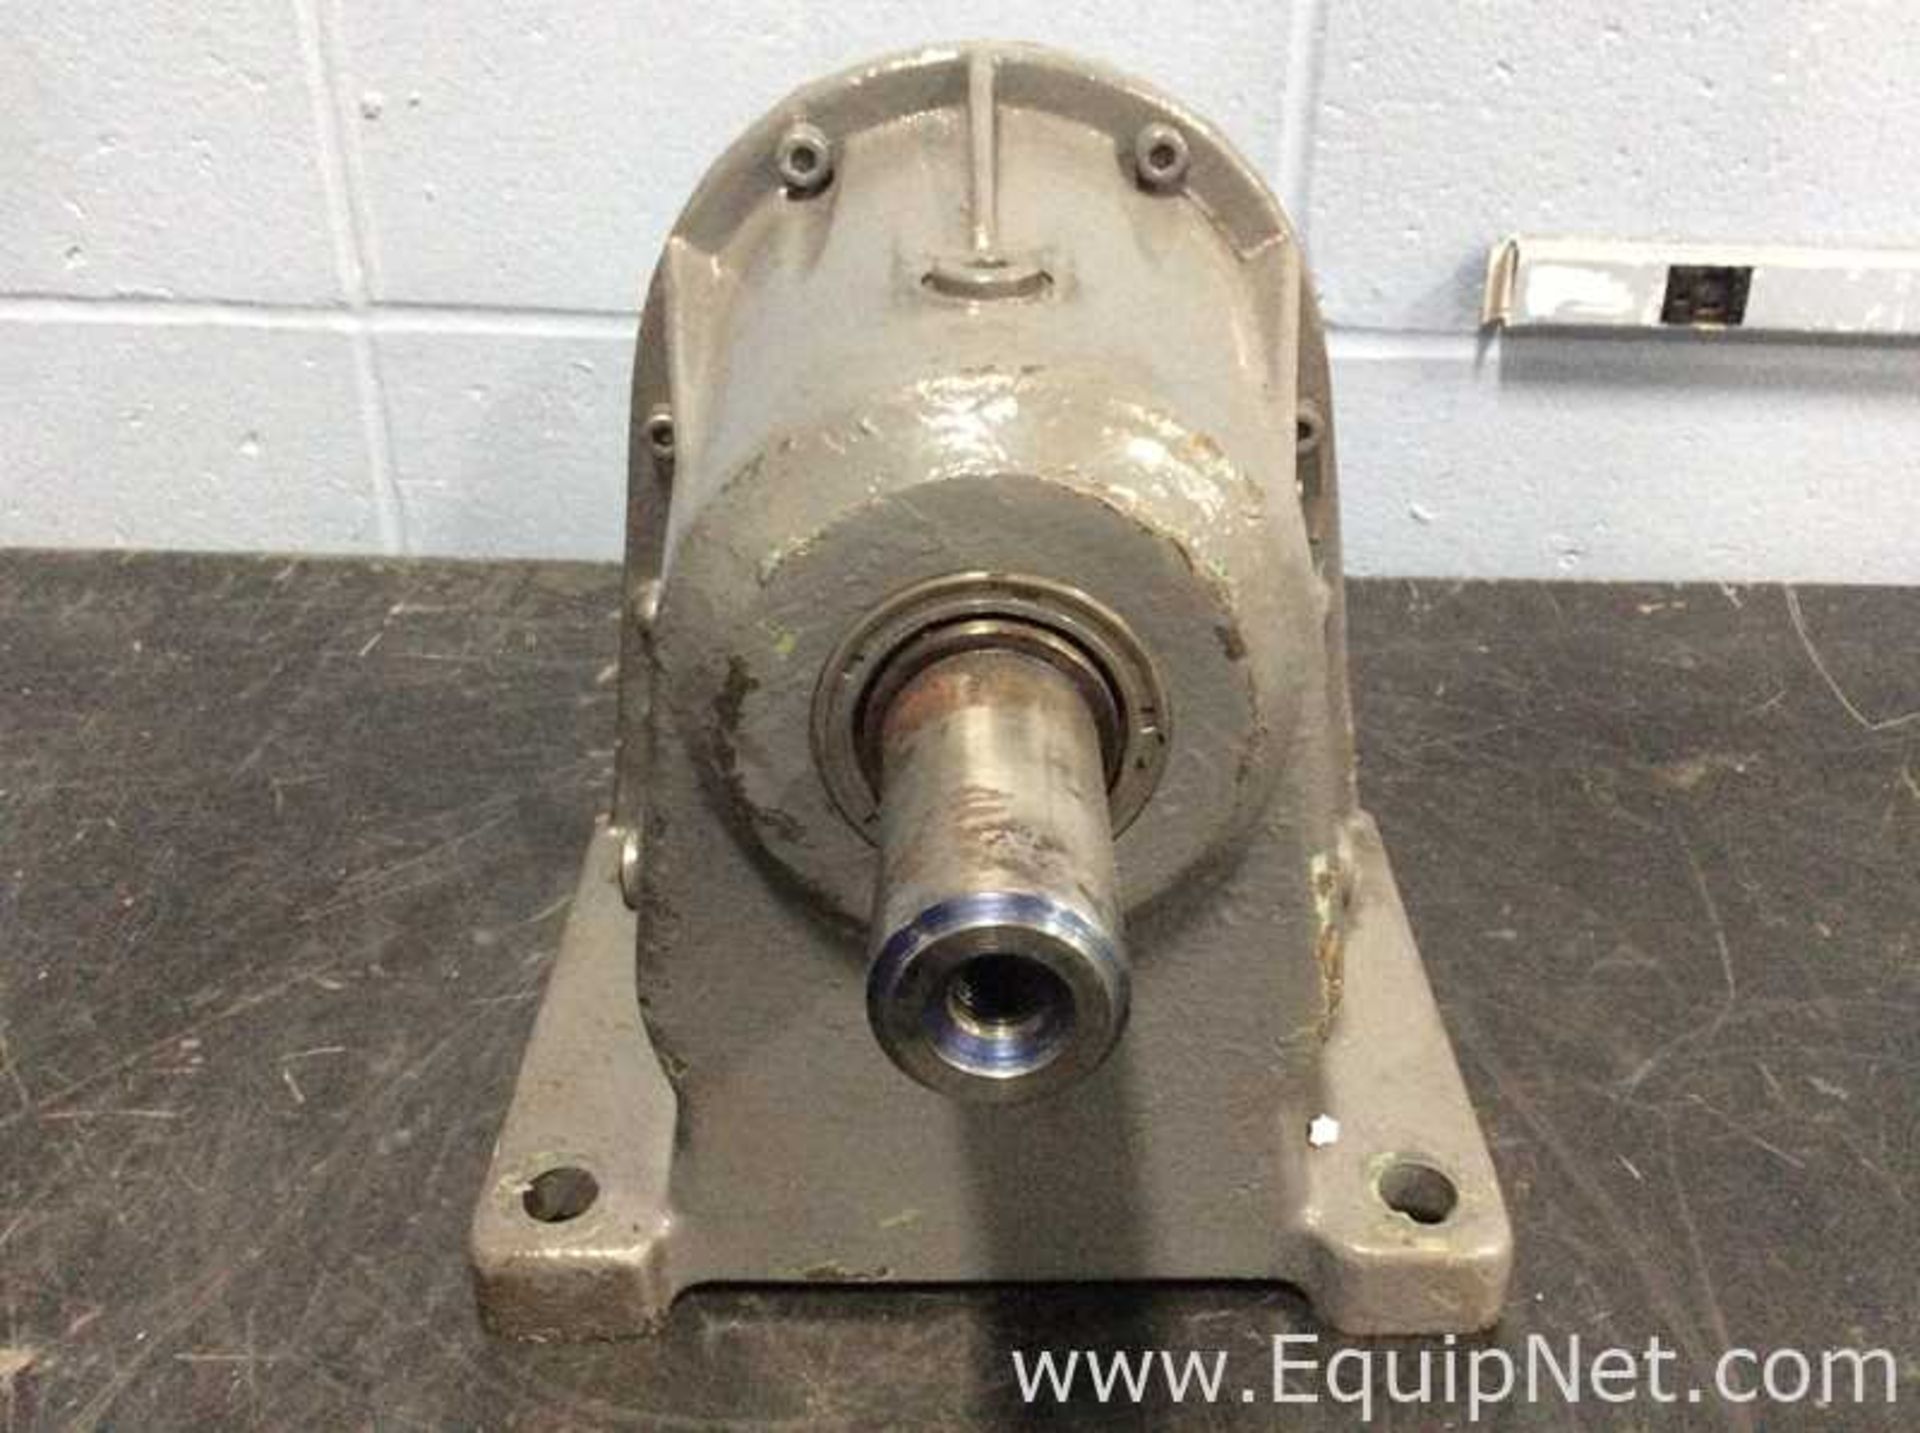 Lenze 12.206 electric Motor With Drive Box - Image 4 of 8